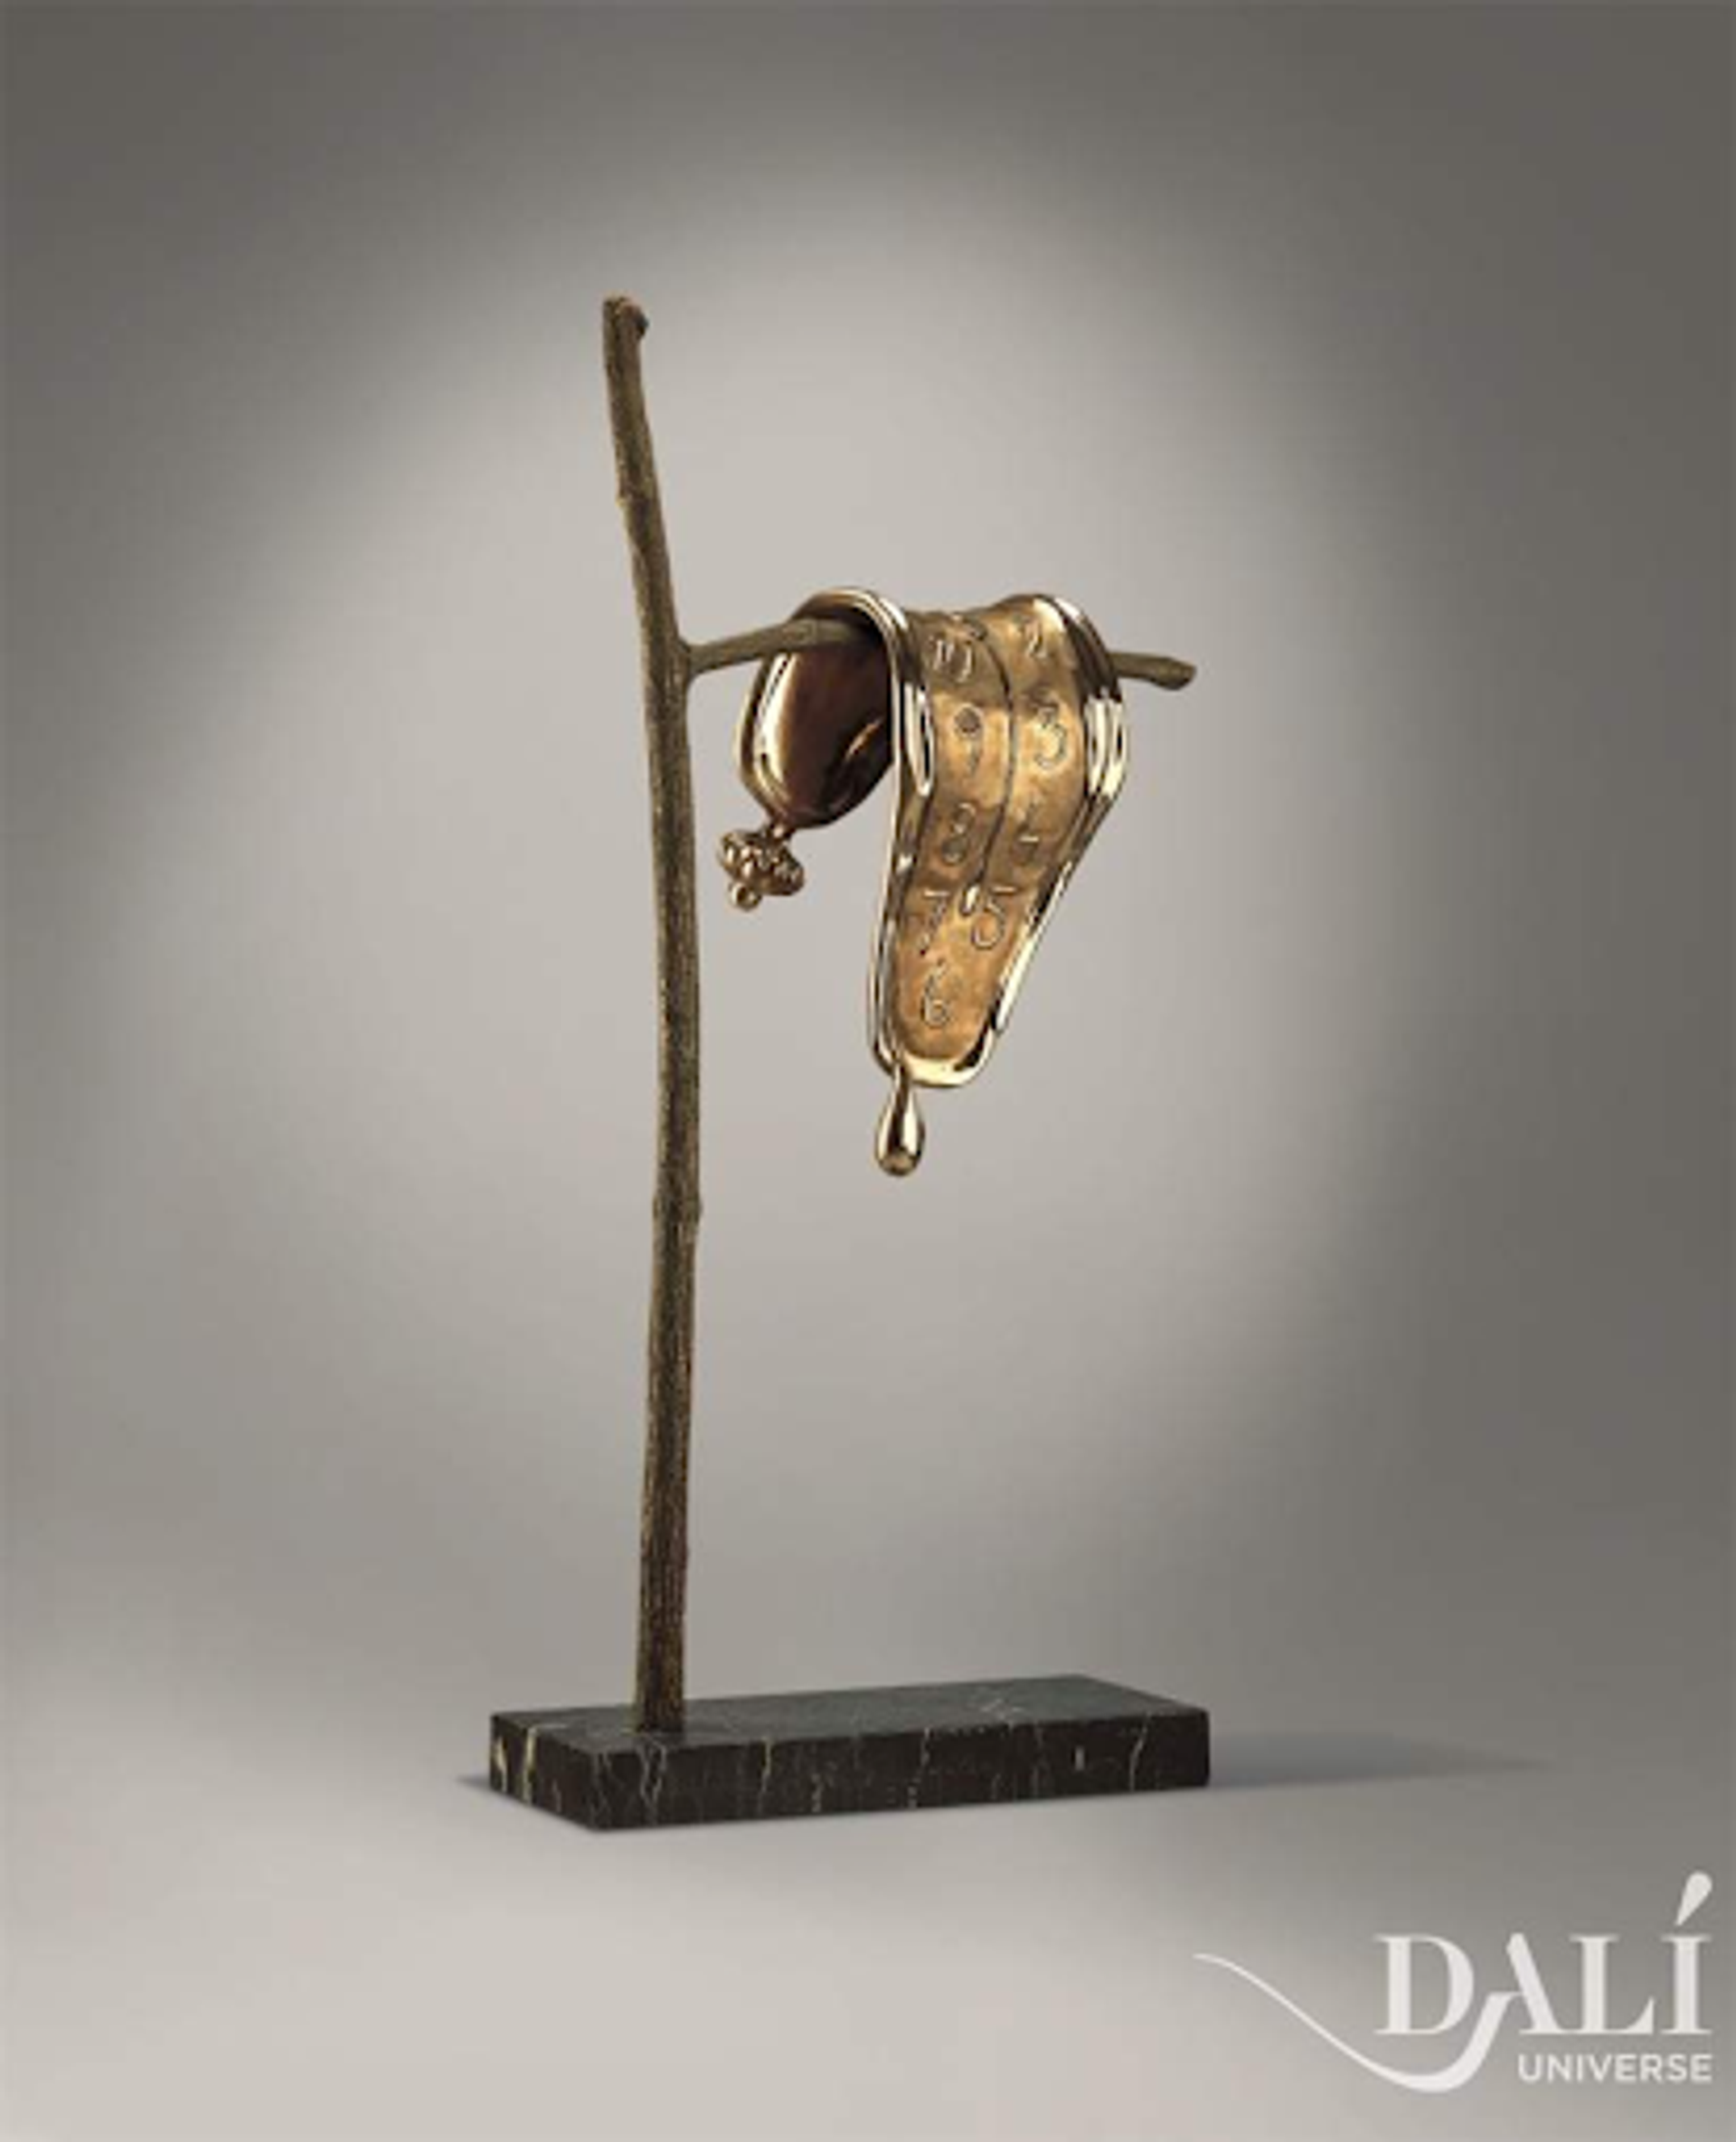 Salvador Dalí’s Persistence of Memory.  A bronze sculpture of a warped clock over a branch